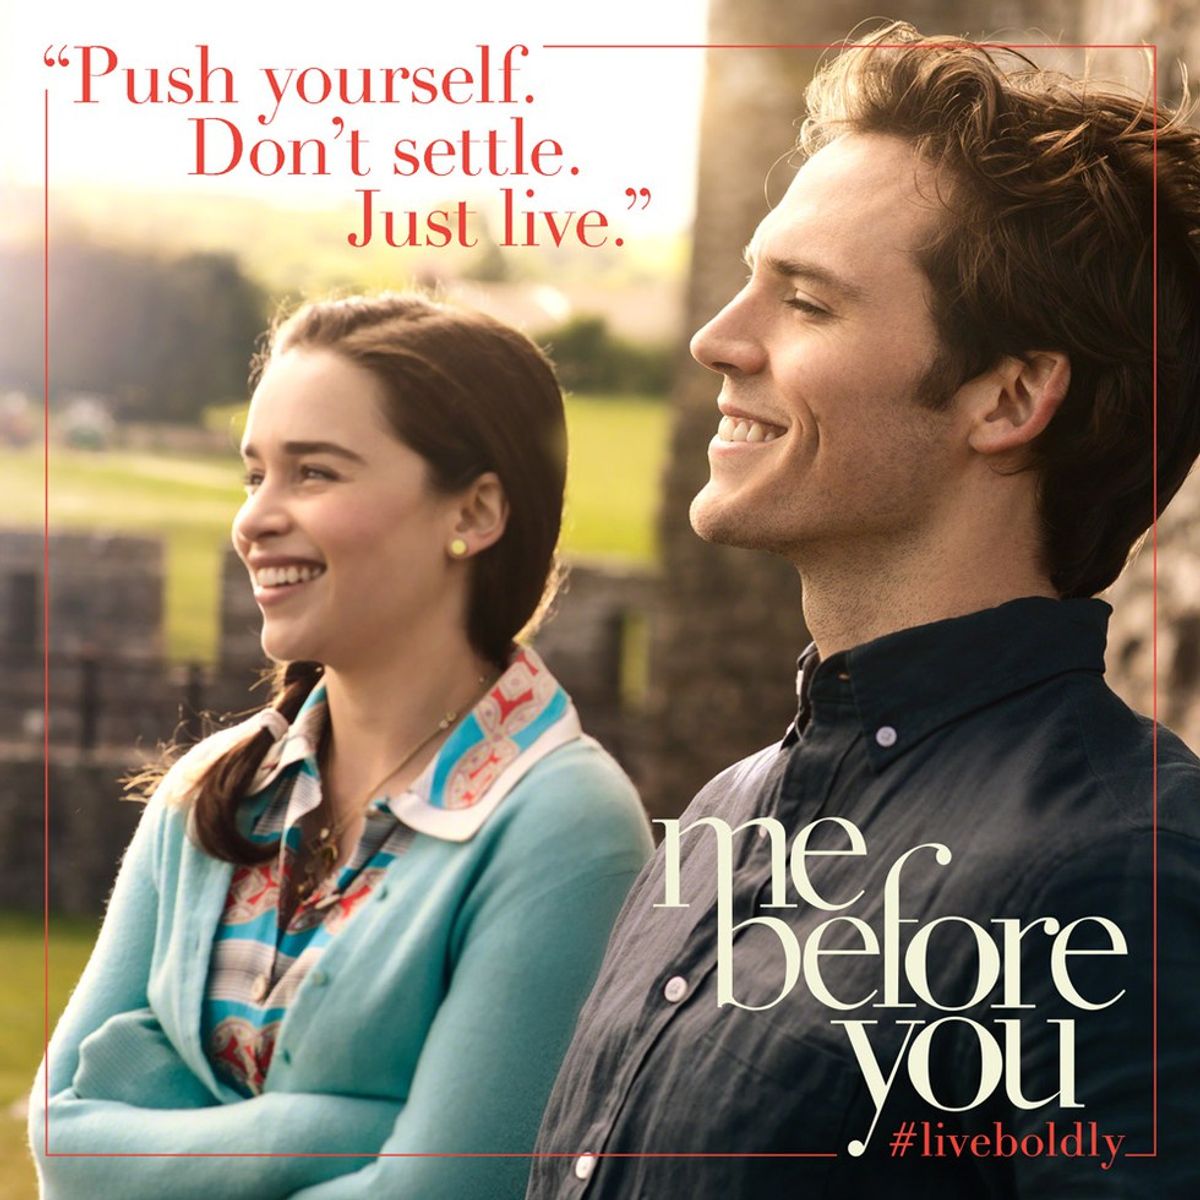 How "Me Before You" Empowers Those Living With Disability